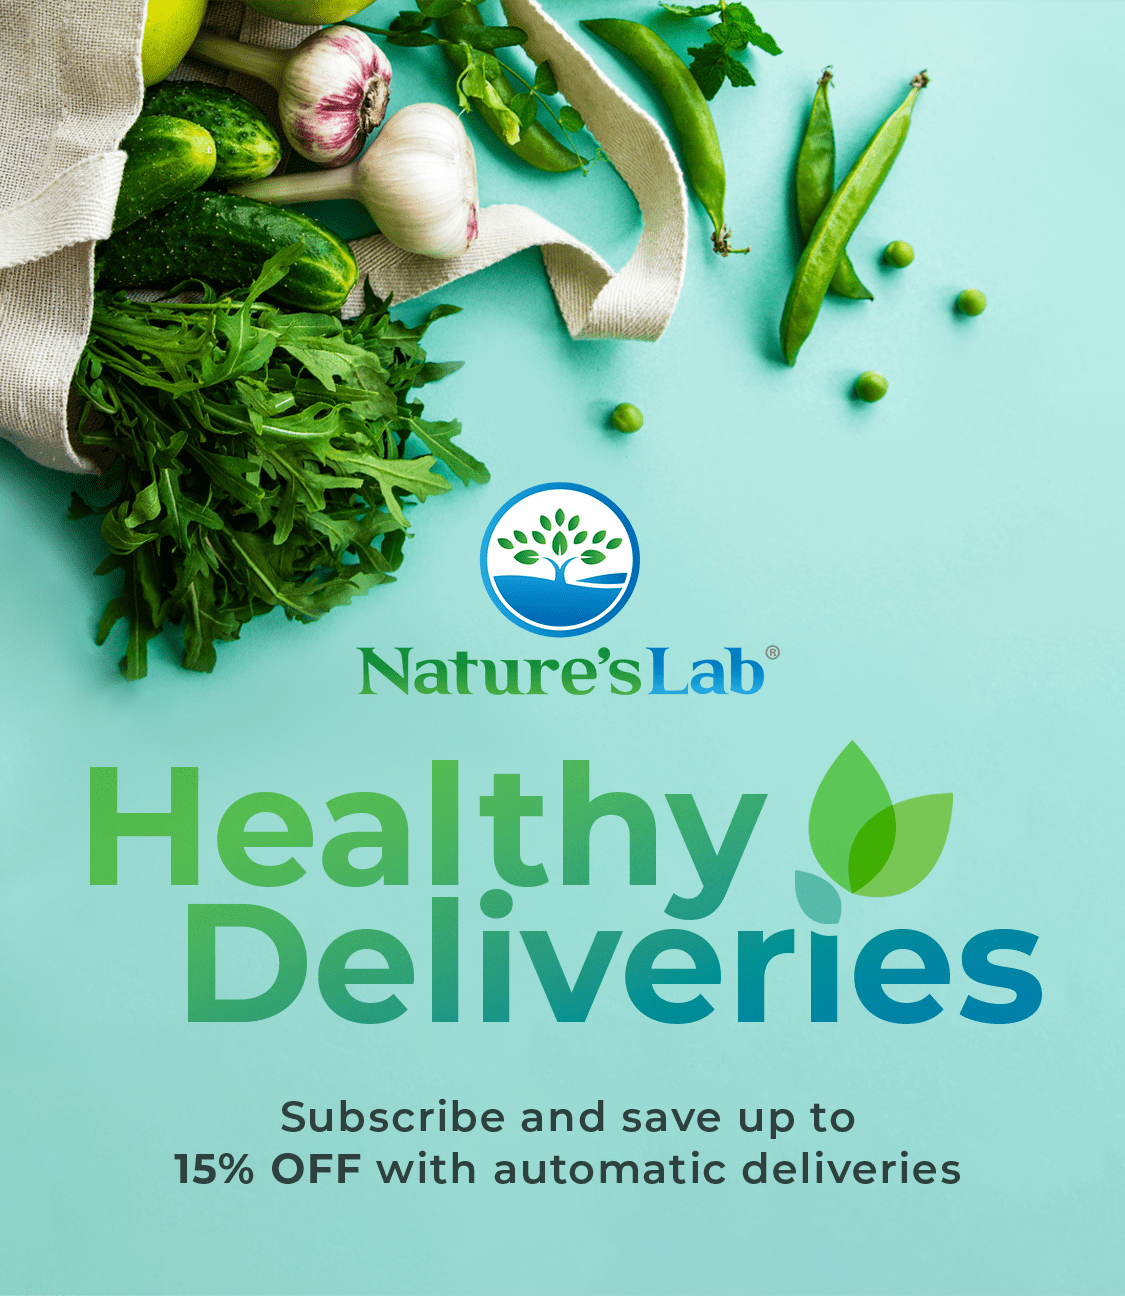 Healthy Deliveries - Subscribe and save up to 15% off with automatic deliveries